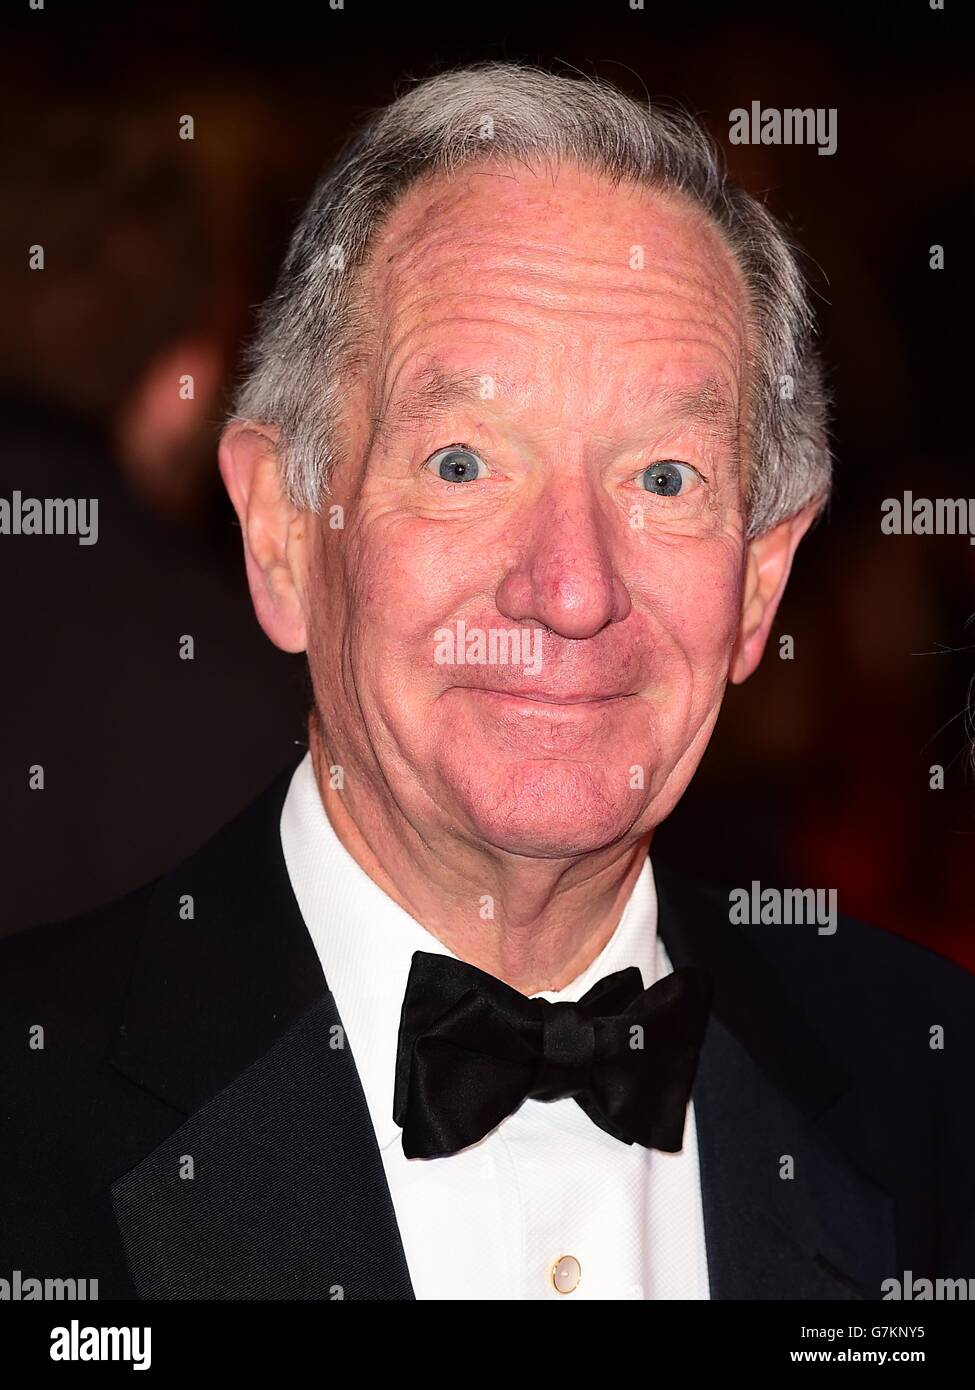 Michael Buerk arriving for the 2015 National Television Awards at the O2 Arena, London. Stock Photo